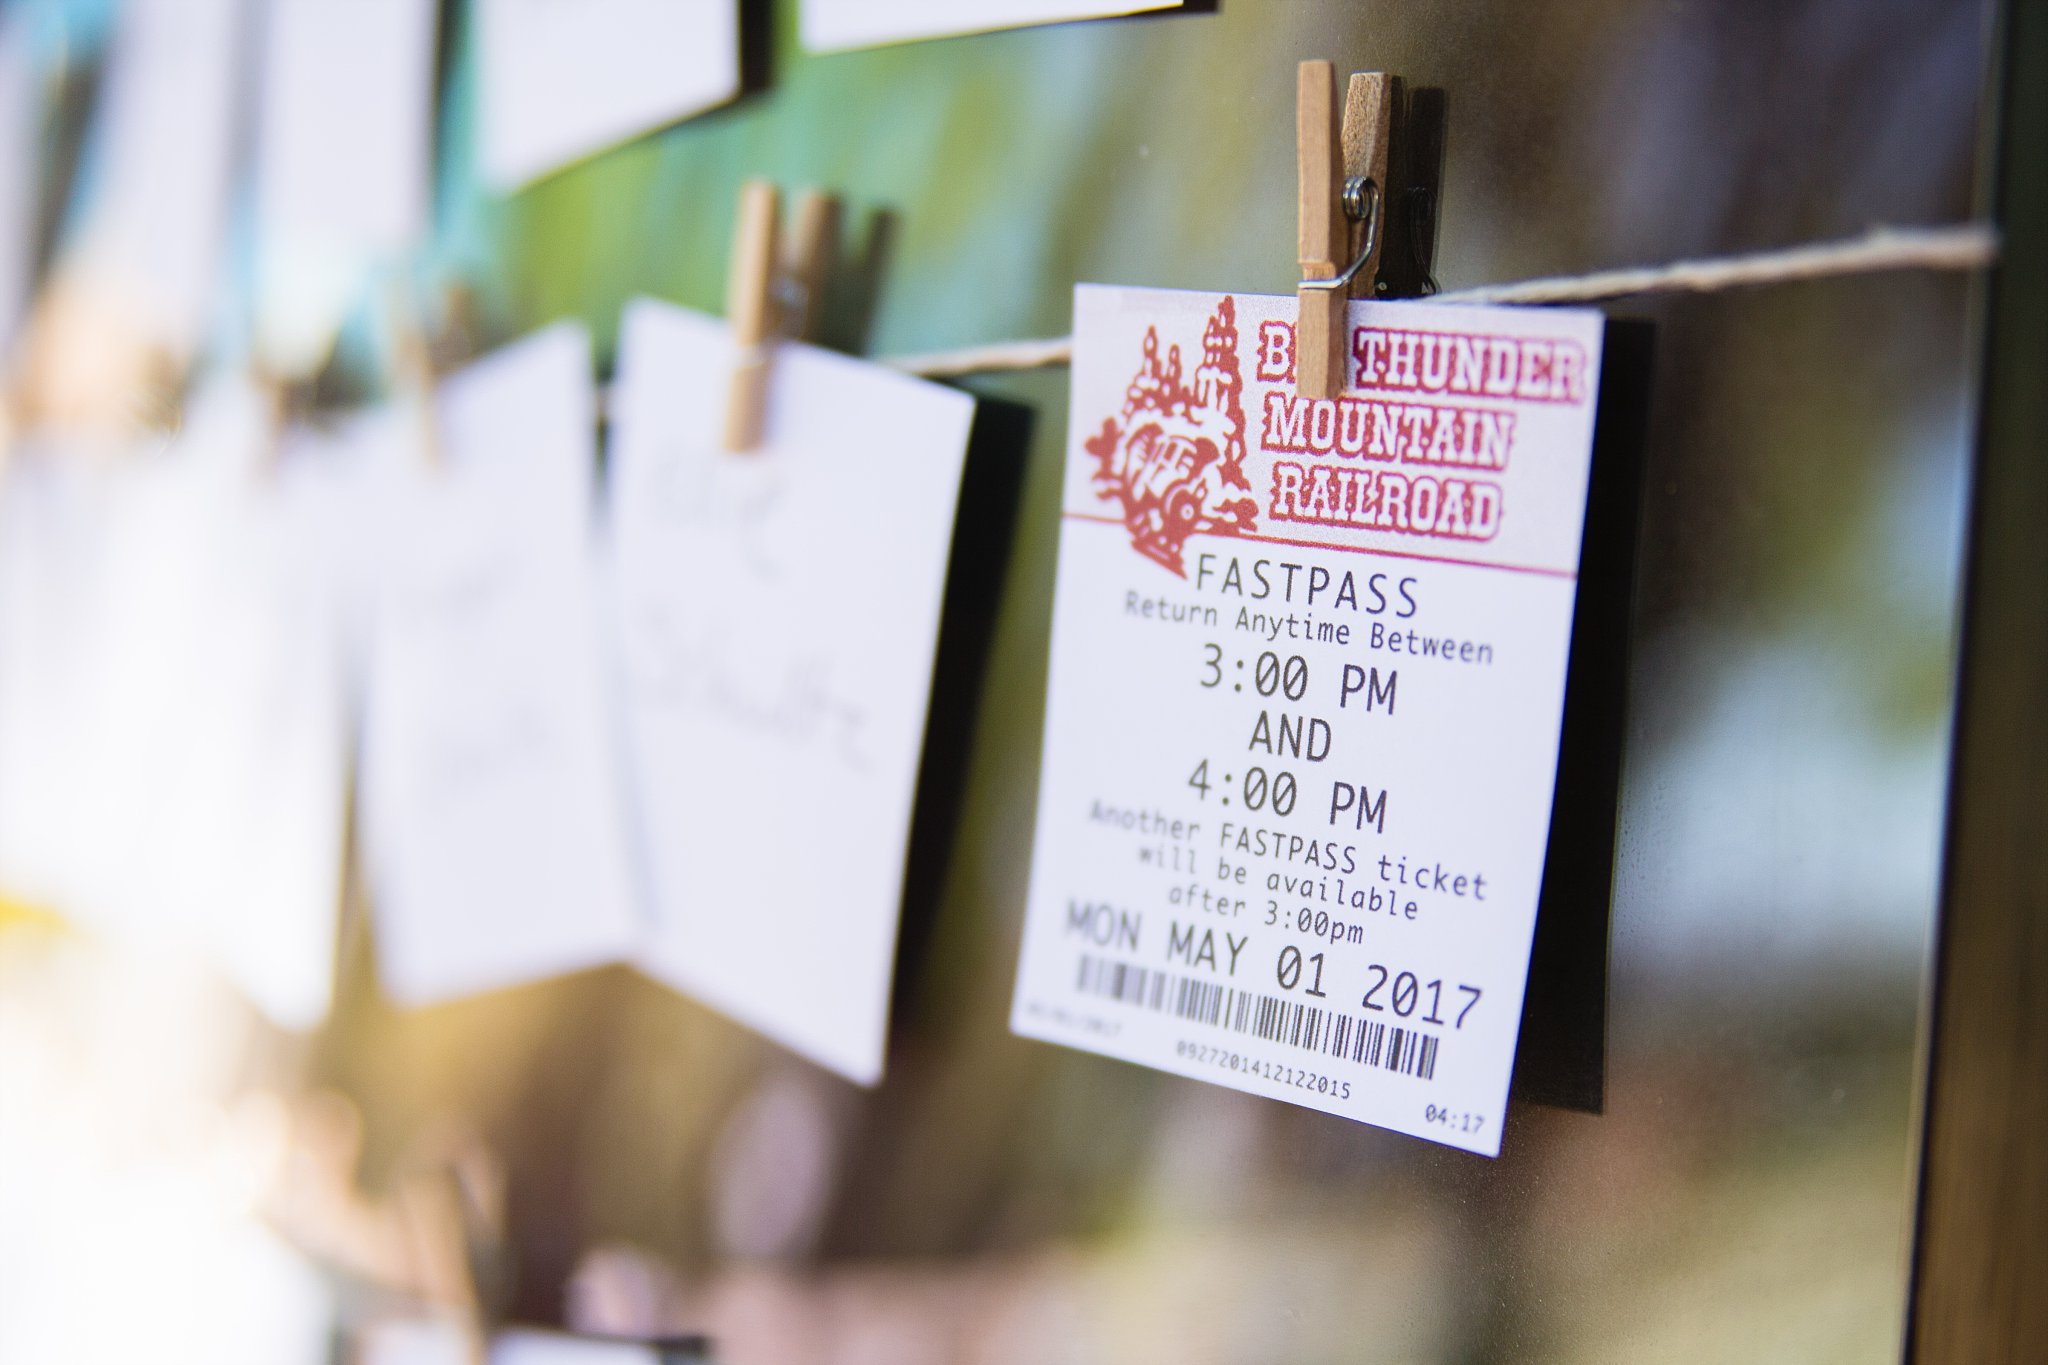 Disneyland inspired fastpass escort cards for wedding reception by PMA Photography.